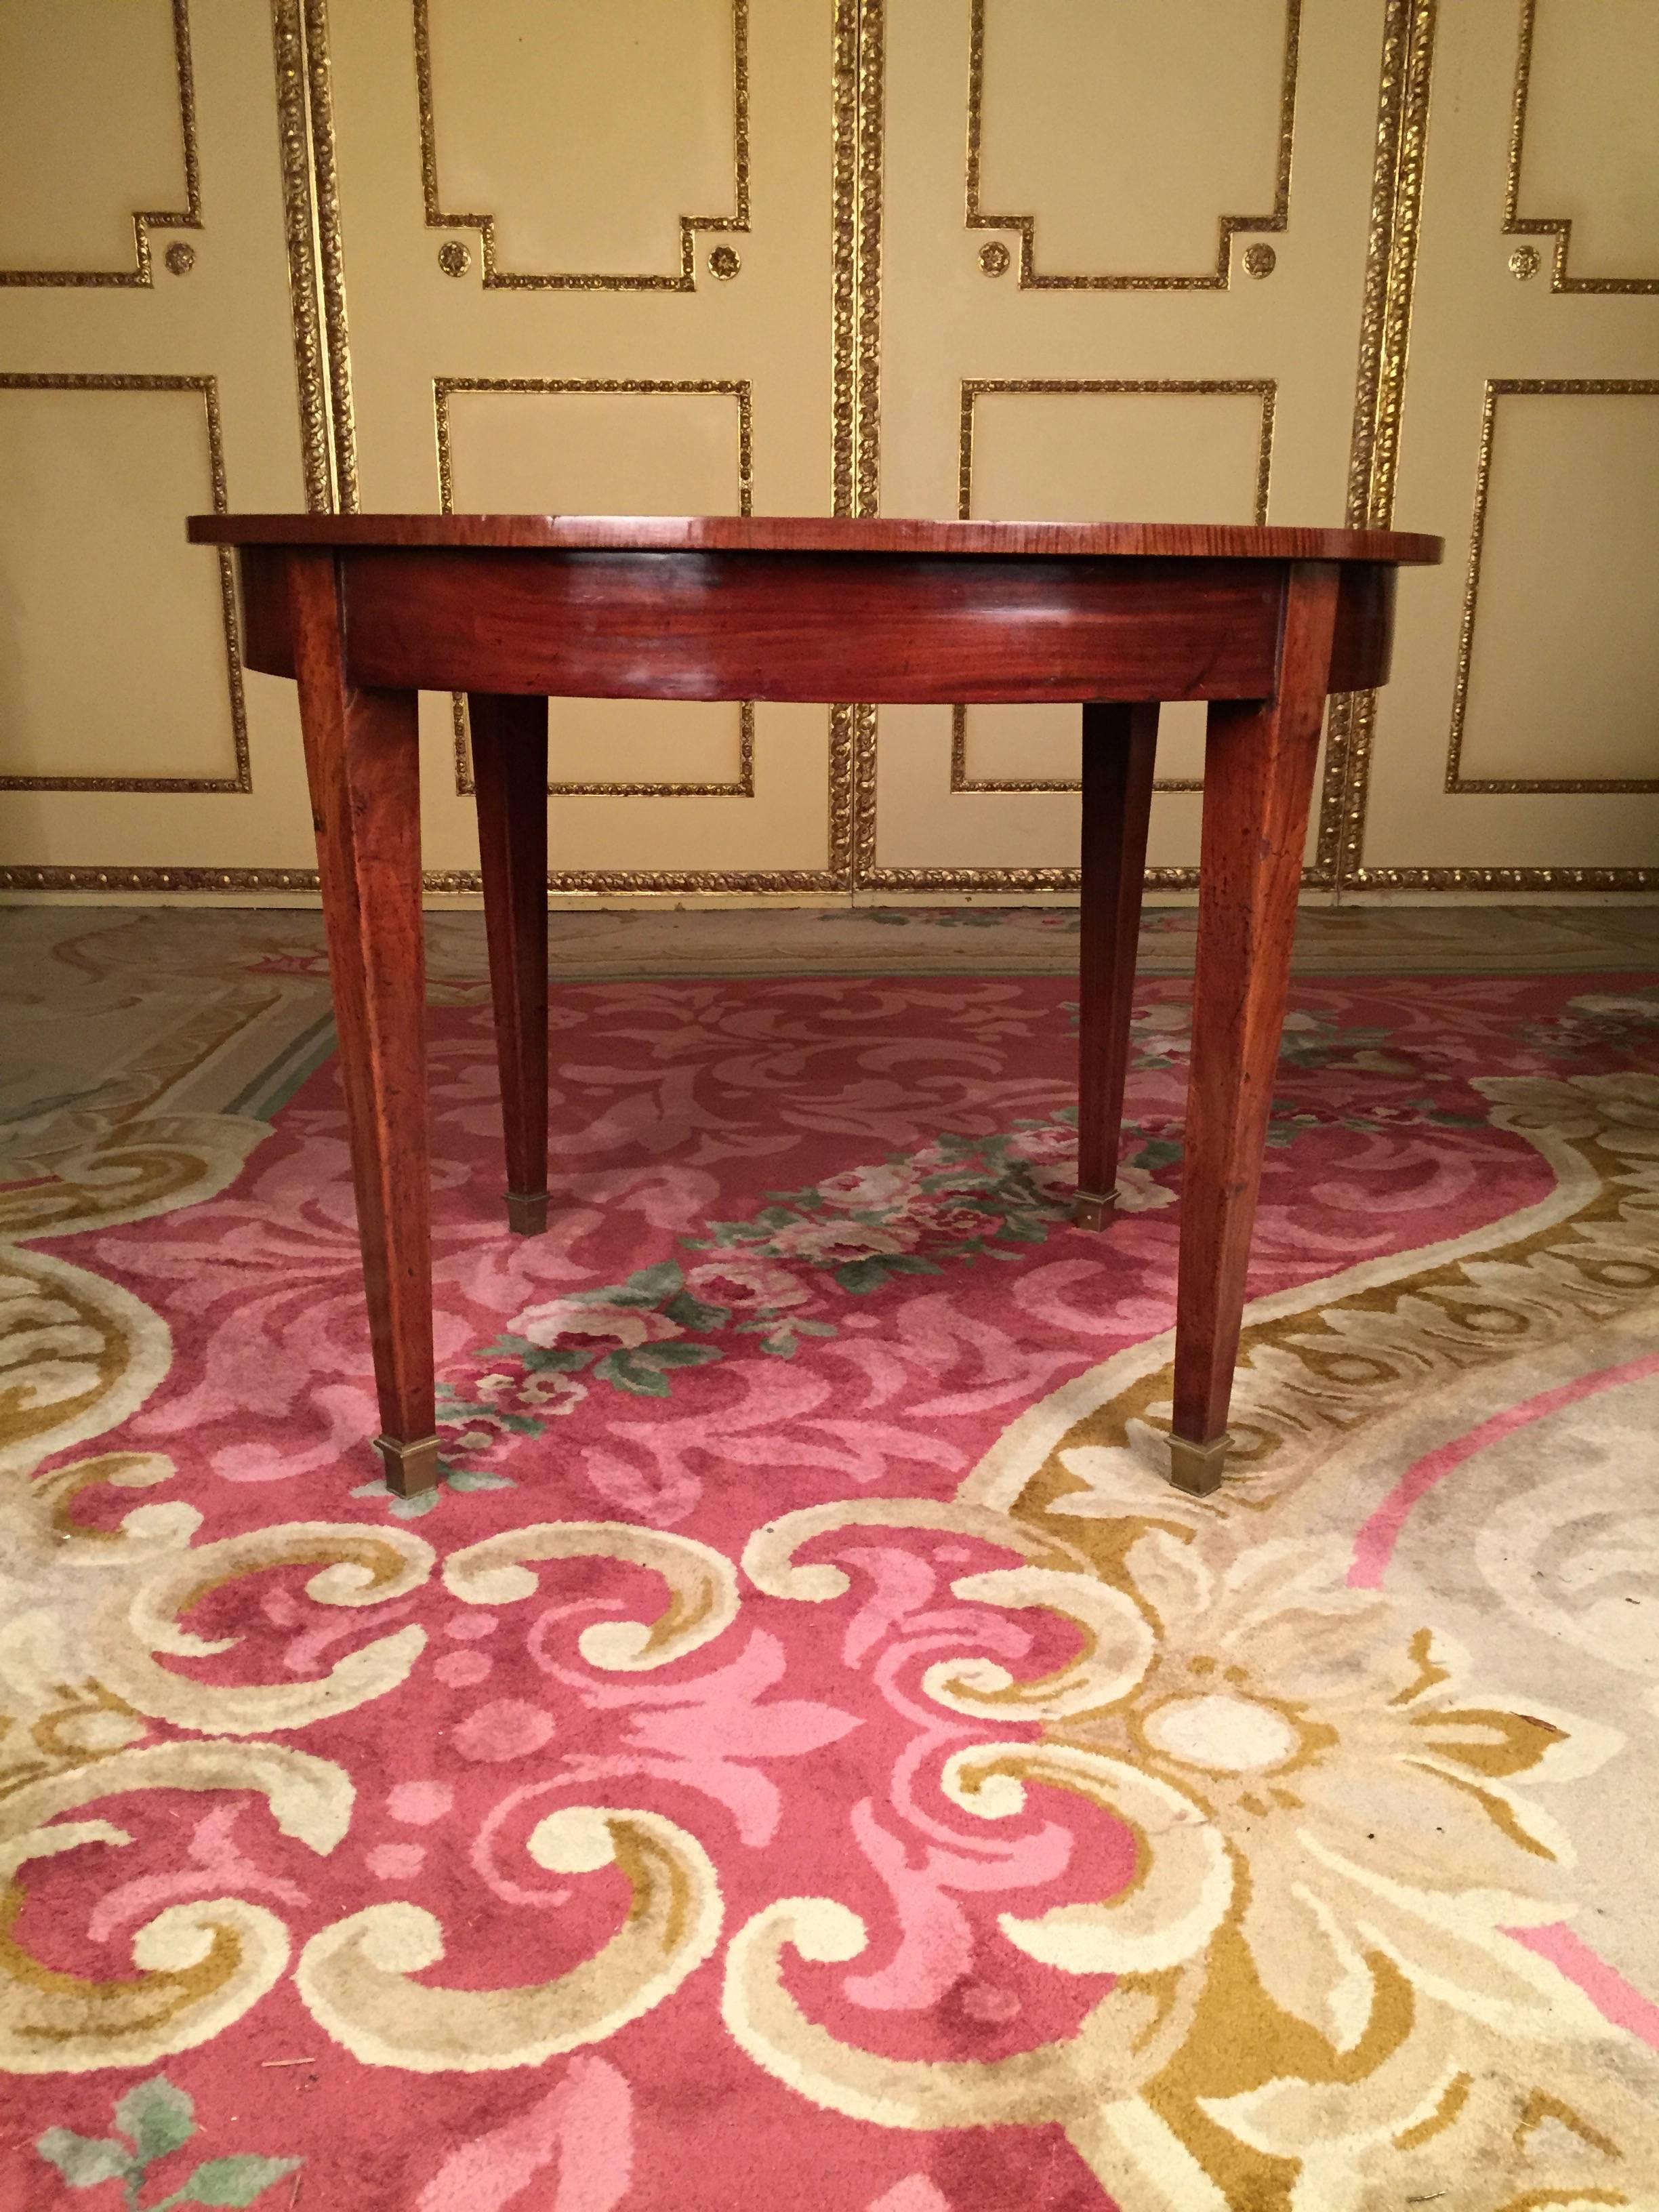 Mahogany solid wood. Pointing legs ending with grommets. Plate was supplemented a long time ago.


(A-139)